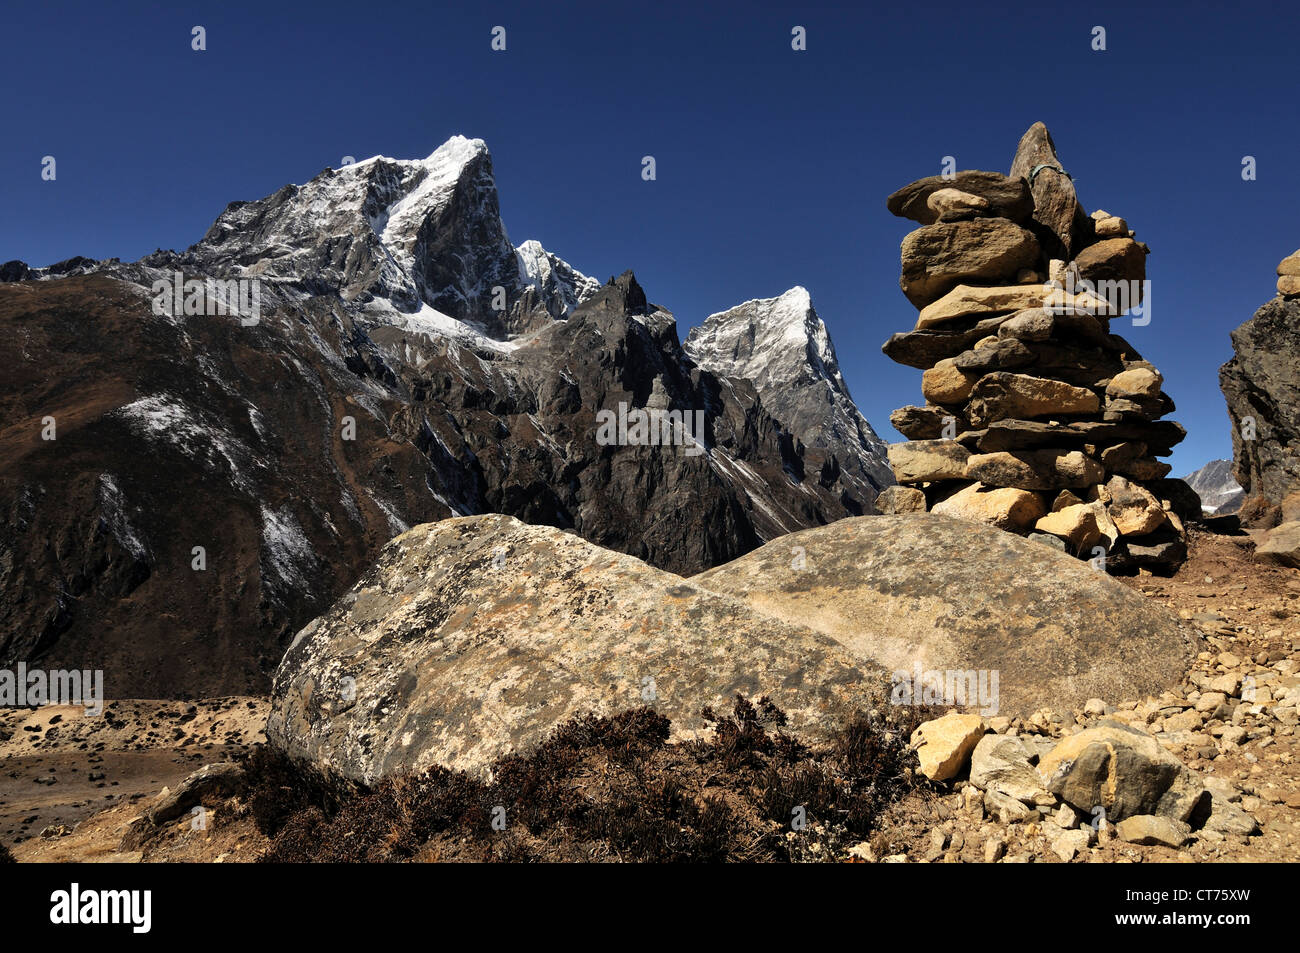 Nepal landscape with mountain range in background Stock Photo